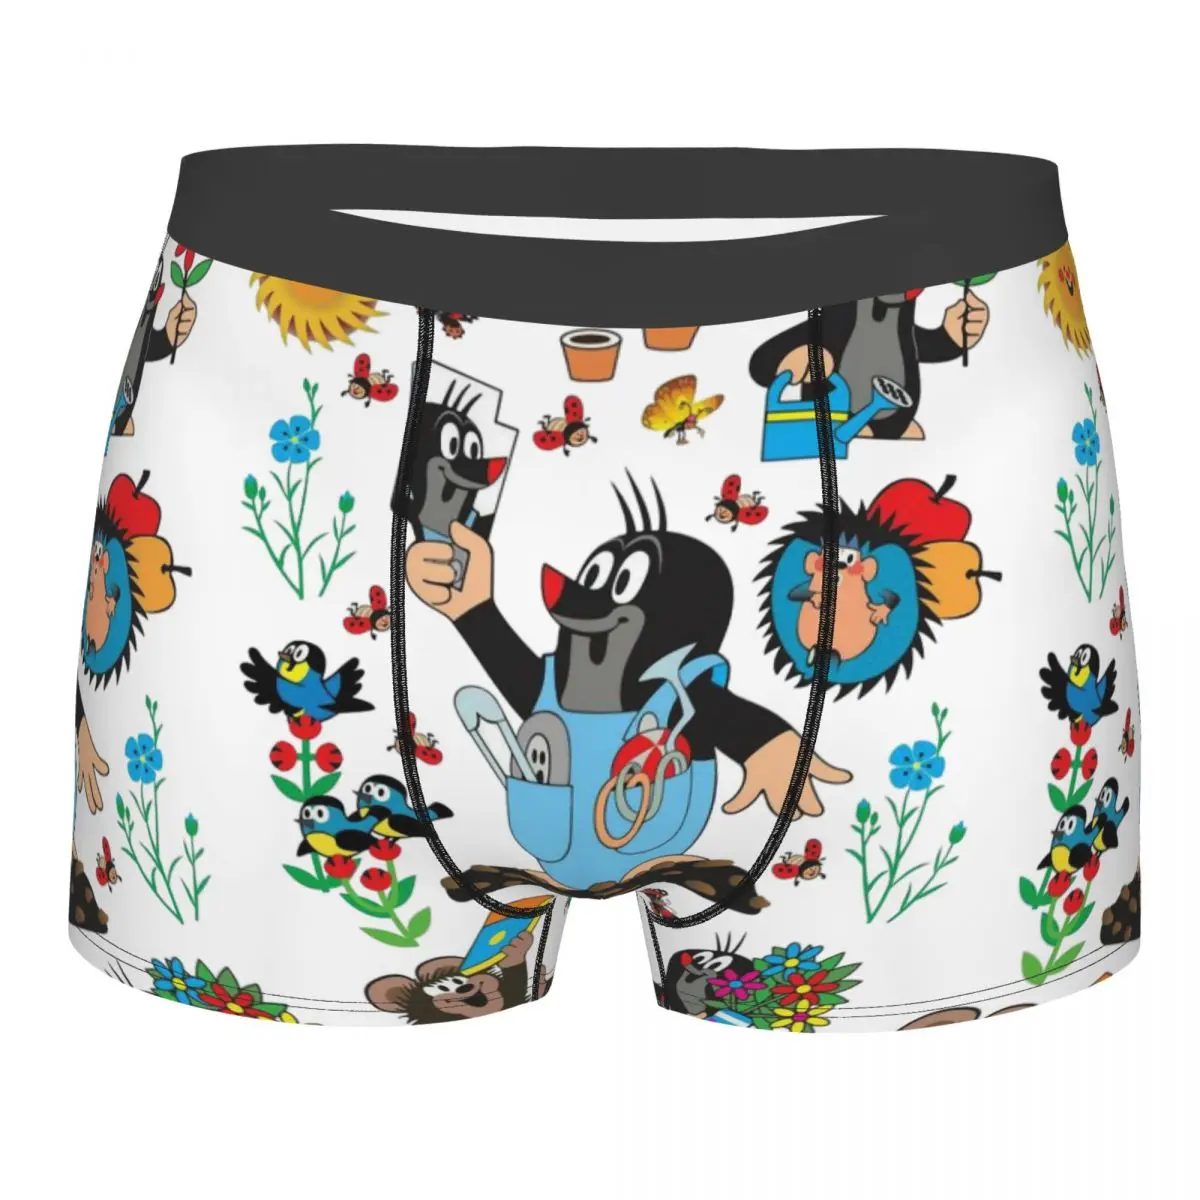 Krtek Little Maulwurf Mencosy Boxer Briefs,3D printing Underpants, Highly Breathable Top Quality Birthday Gifts custom book printing service most popular highly cost effective hardcover book printing hand made hard cover books offset